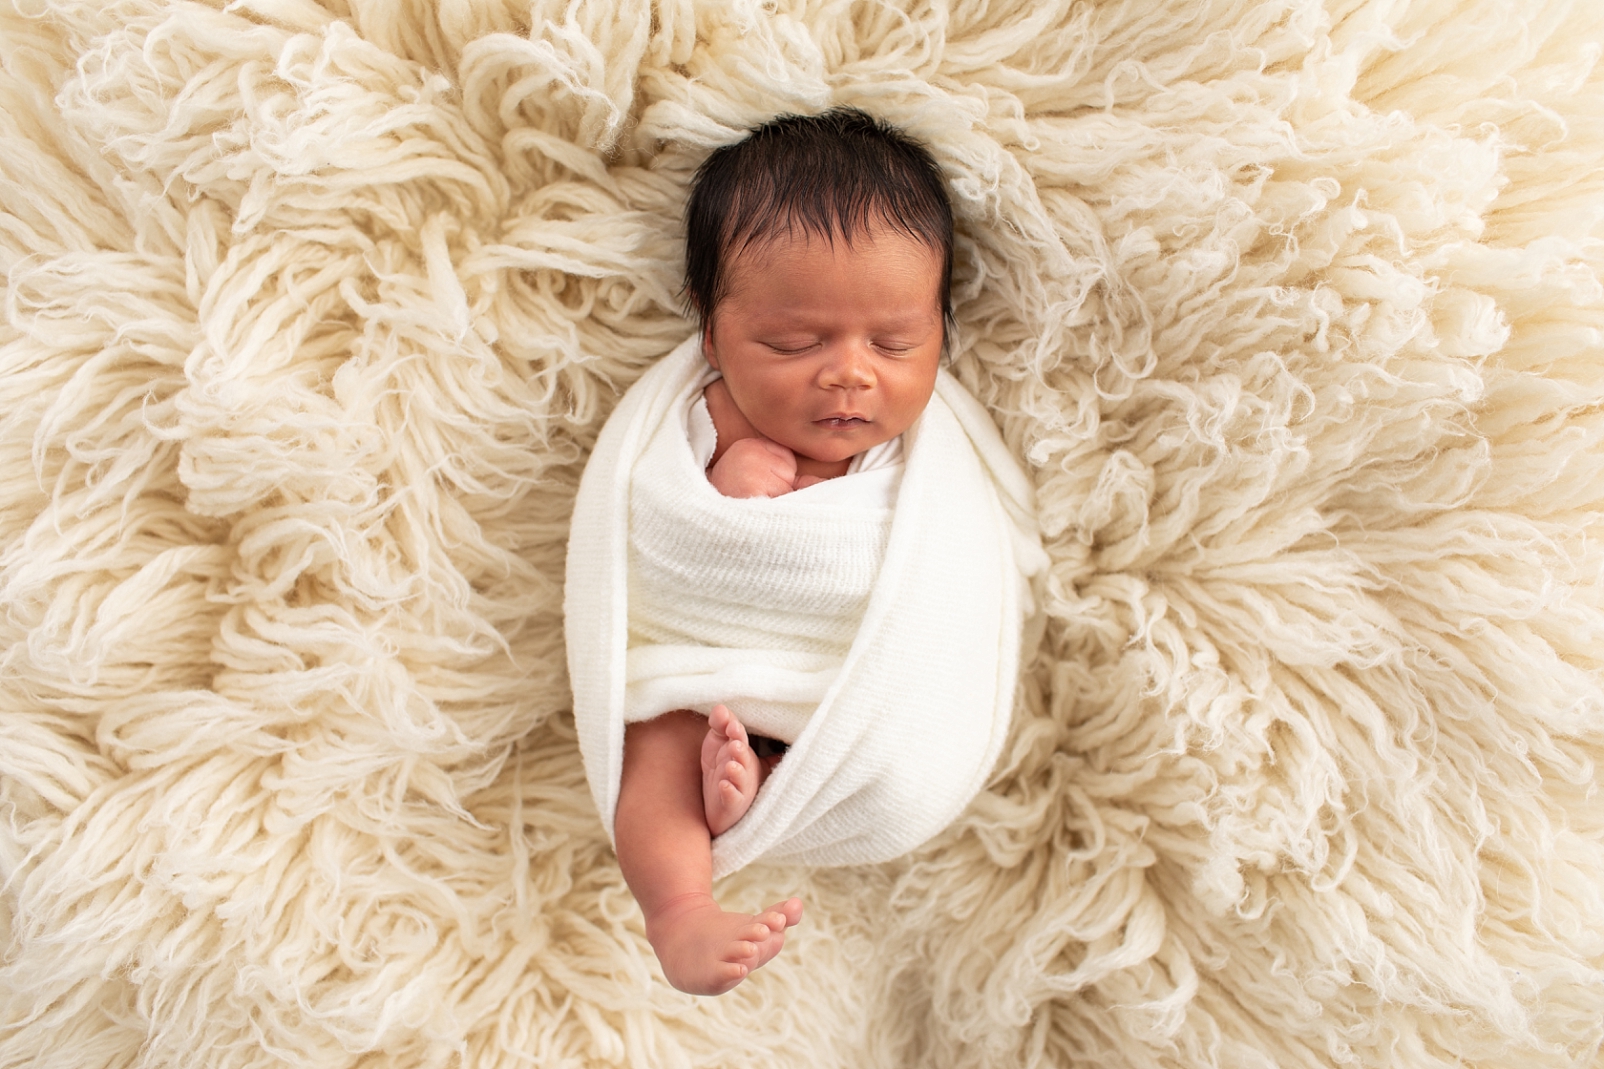 Newborn boy wrapped in white fabric on a flokati